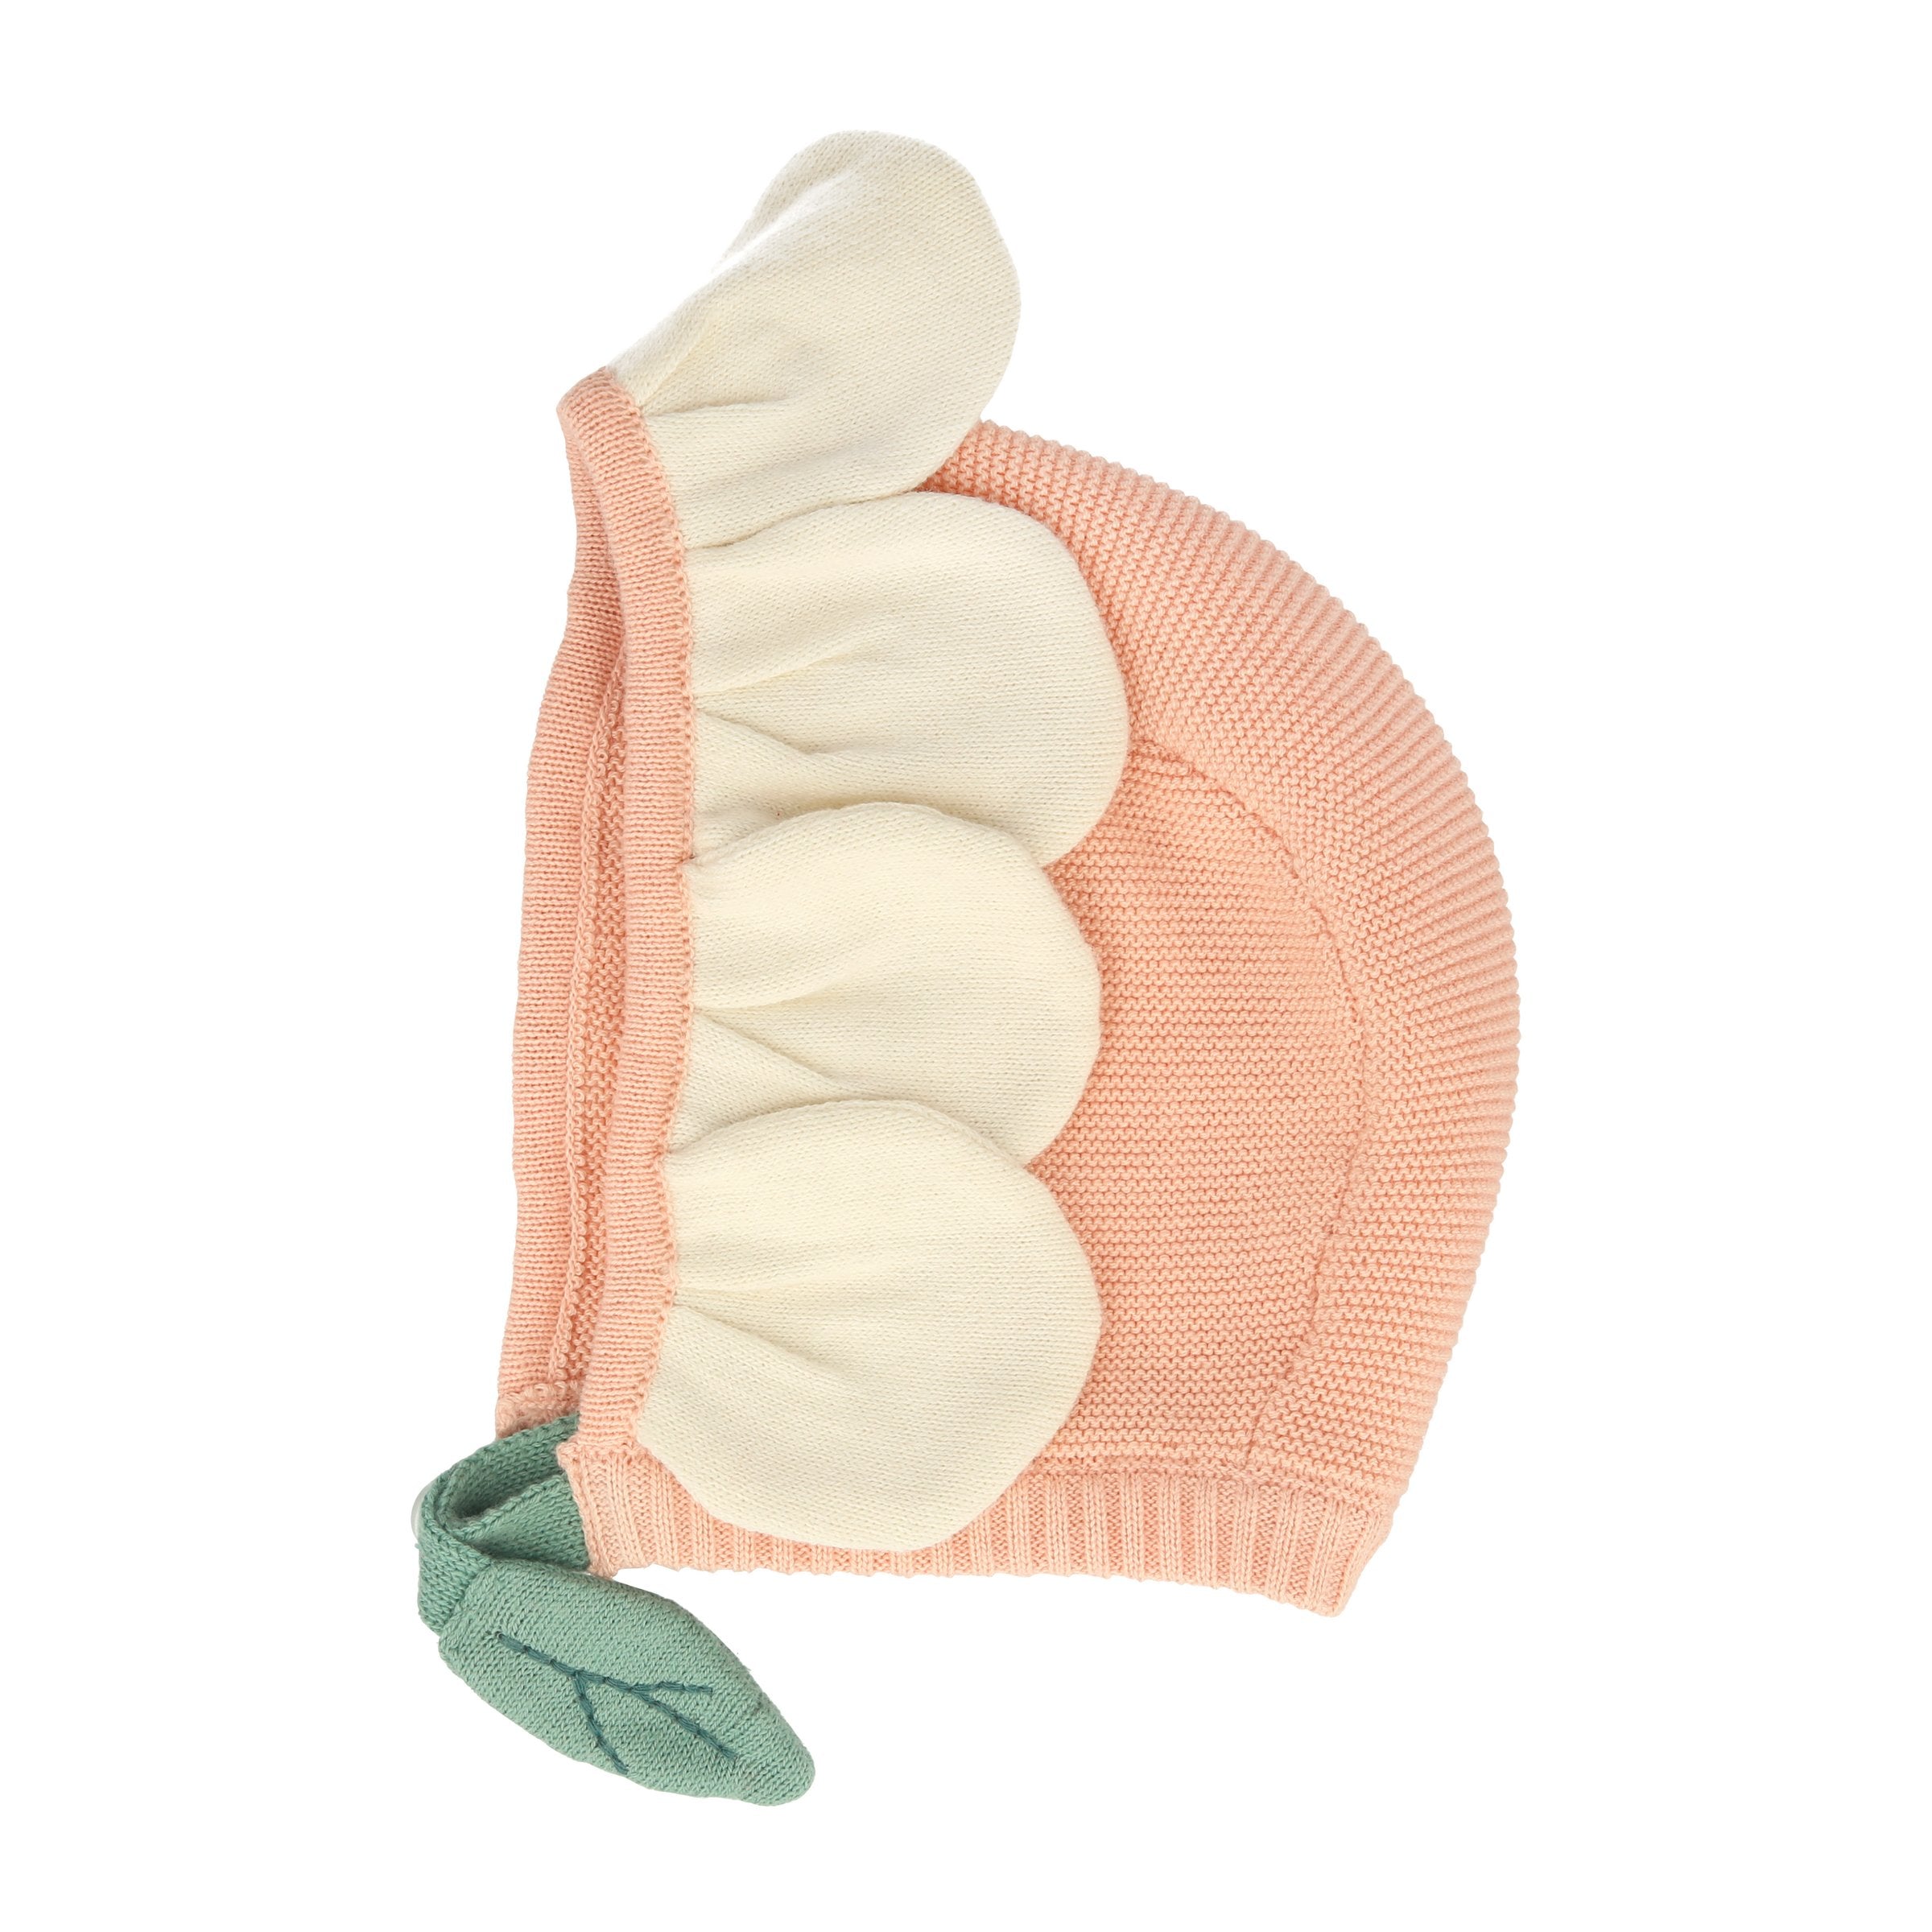 This peach daisy baby bonnet is crafted from organic cotton, with cream petals, green leaf detail and ivory colored buttons.